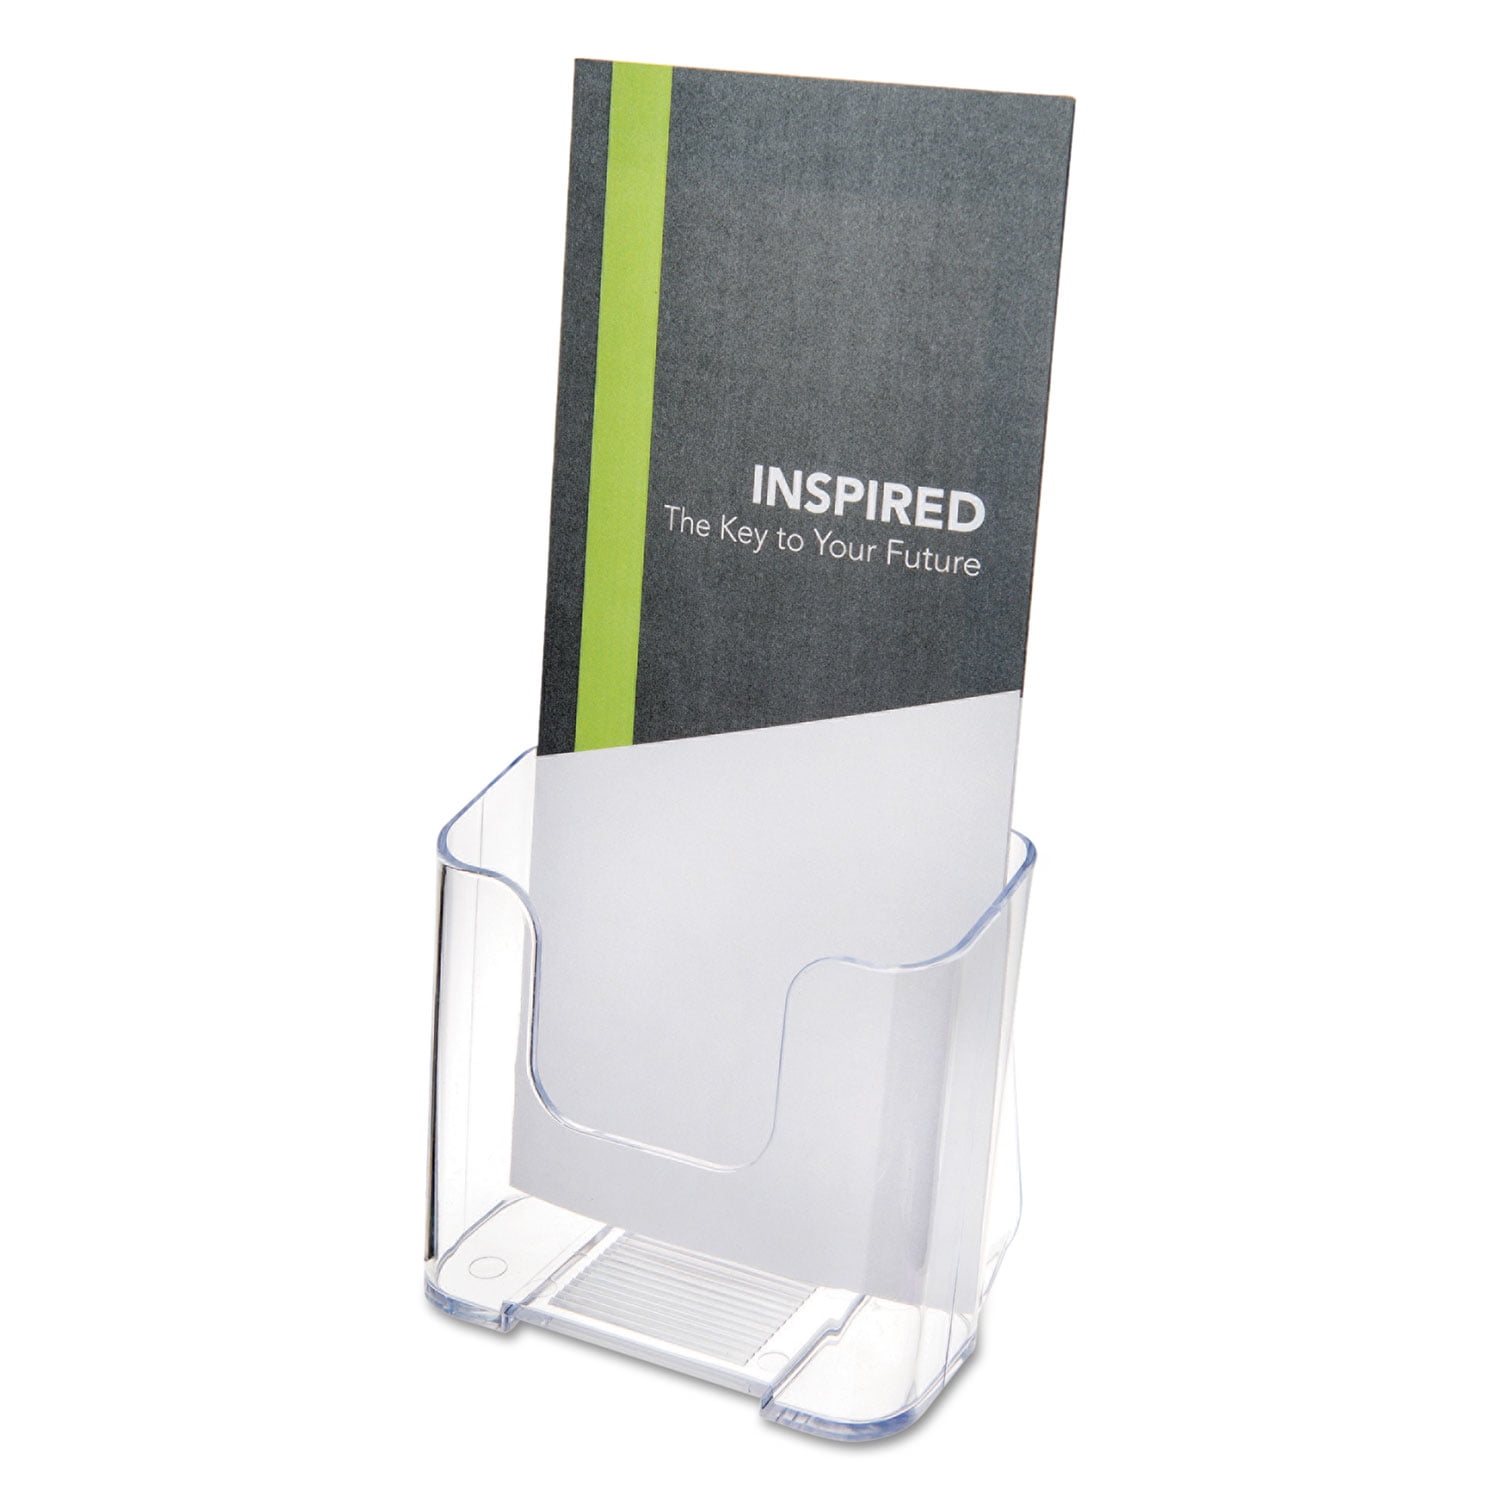 Plymor Clear Acrylic Tri-Fold Brochure Literature Holder Fits 4.125 W Items 2 Pack for Counter/Slatwall